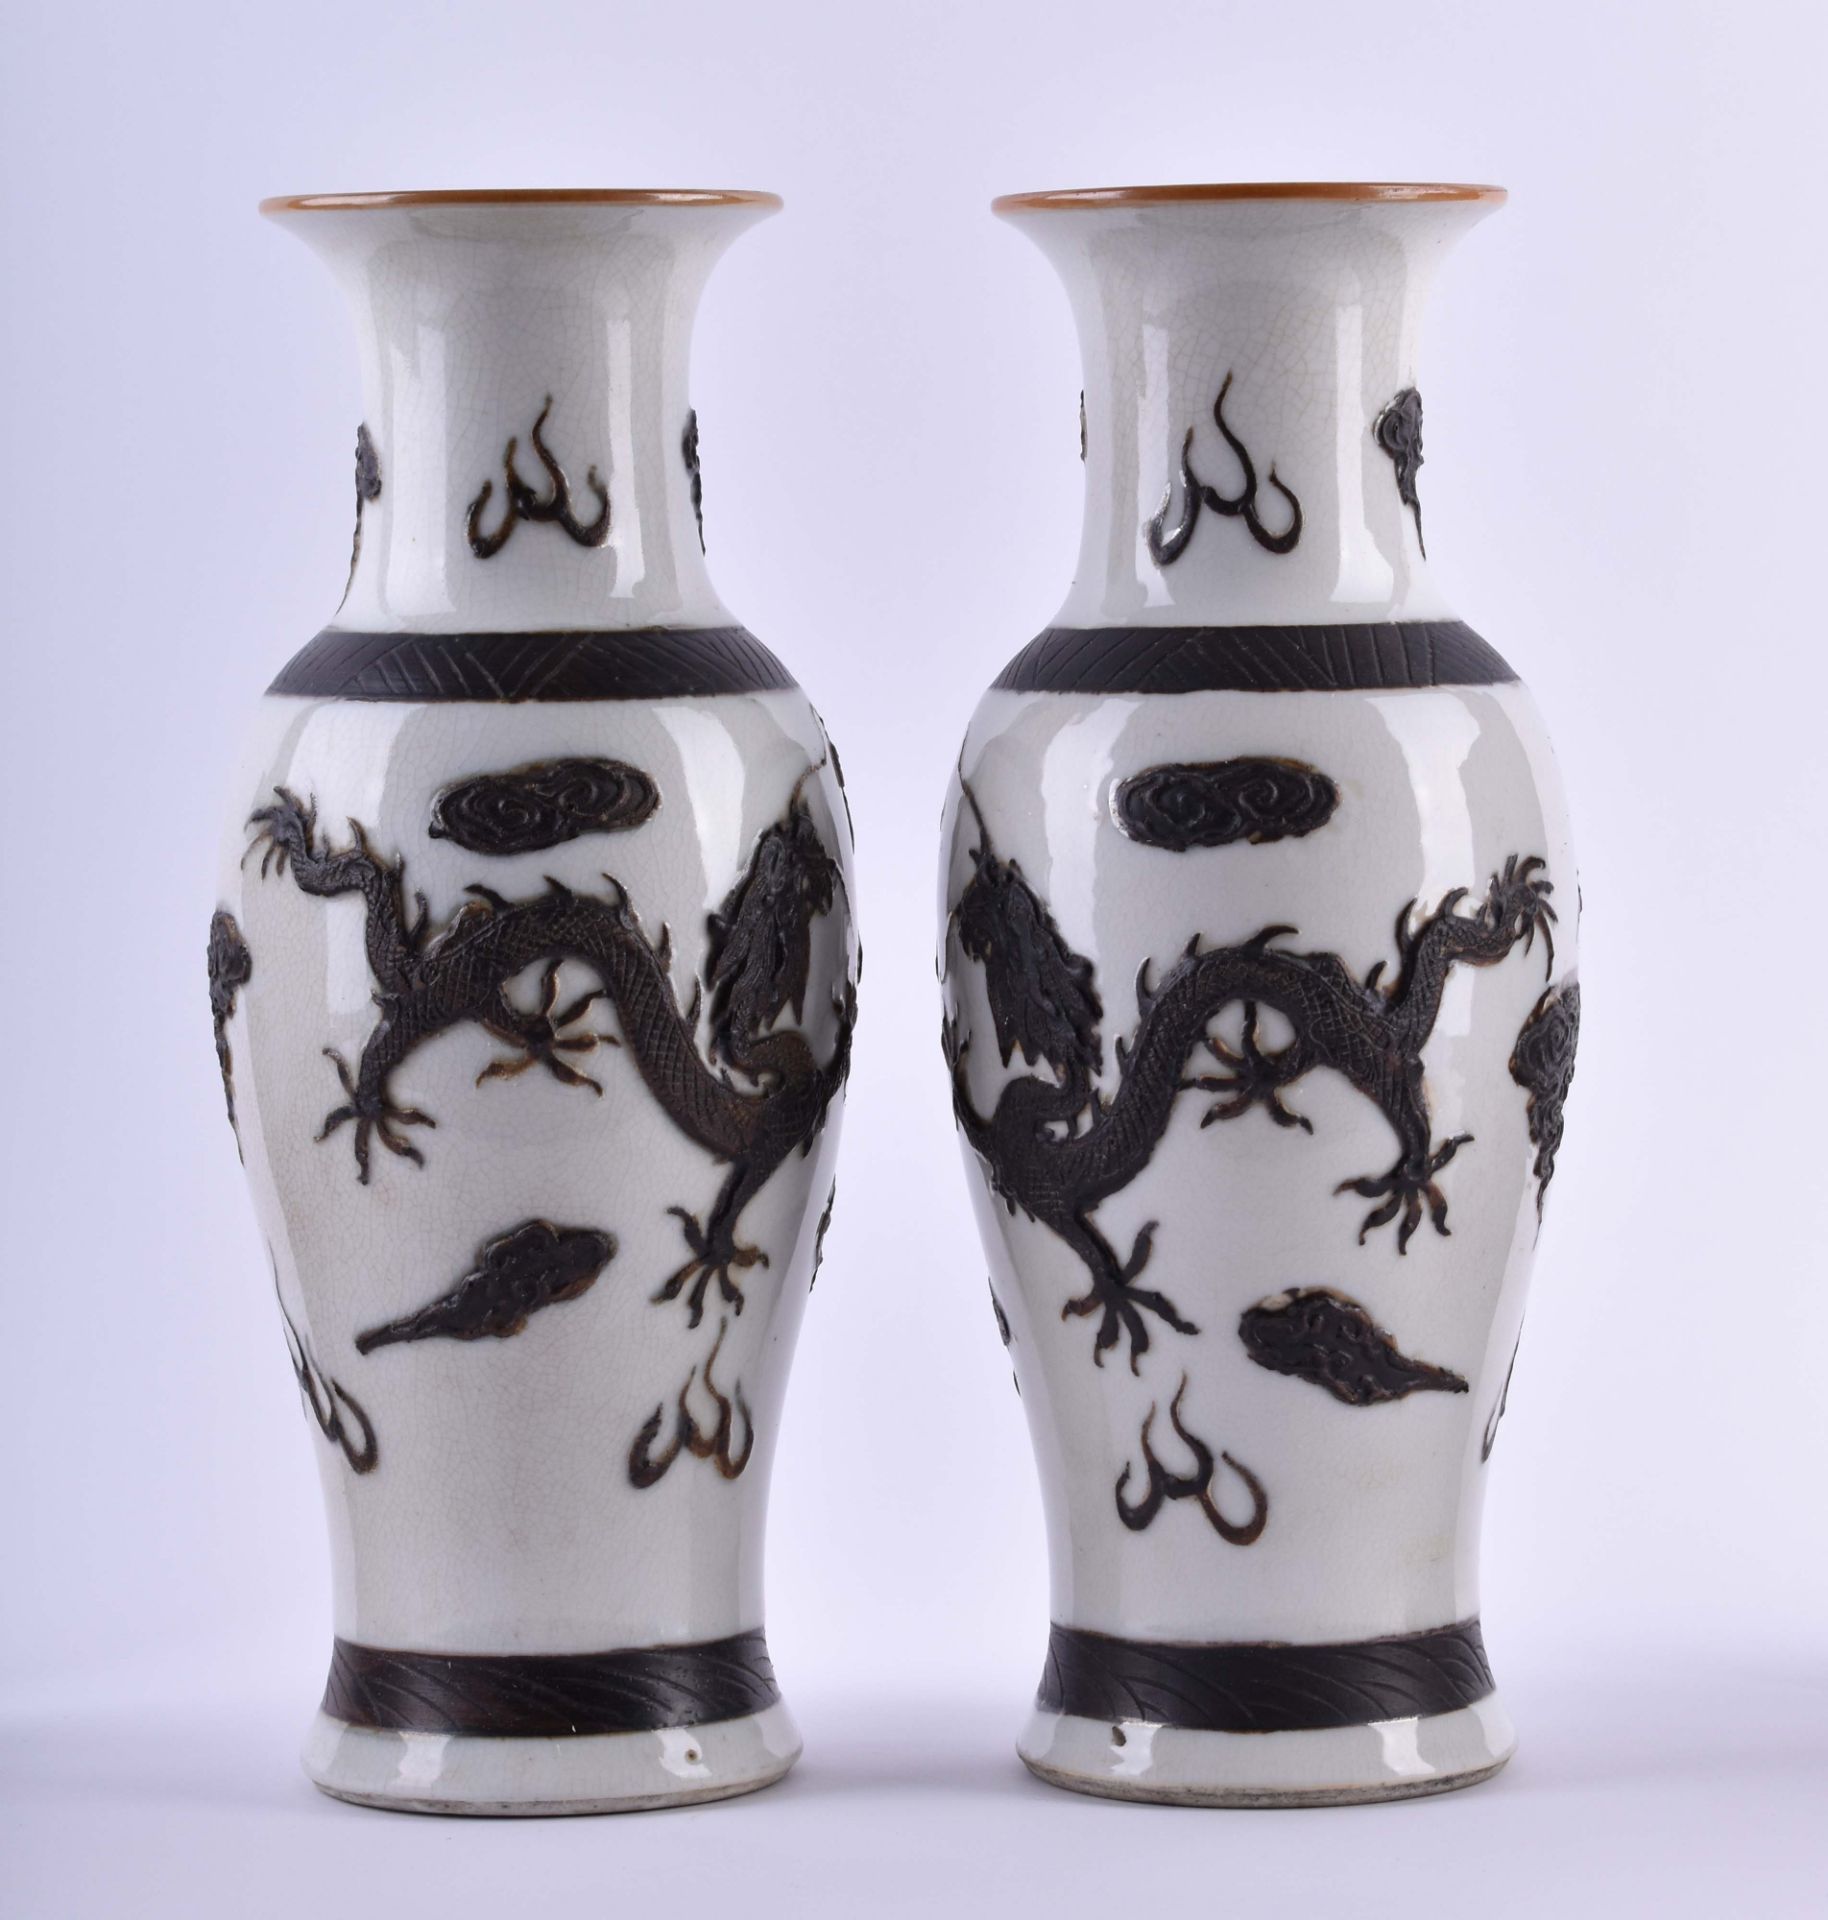  Pair of vases China Qing dynasty - Image 3 of 7